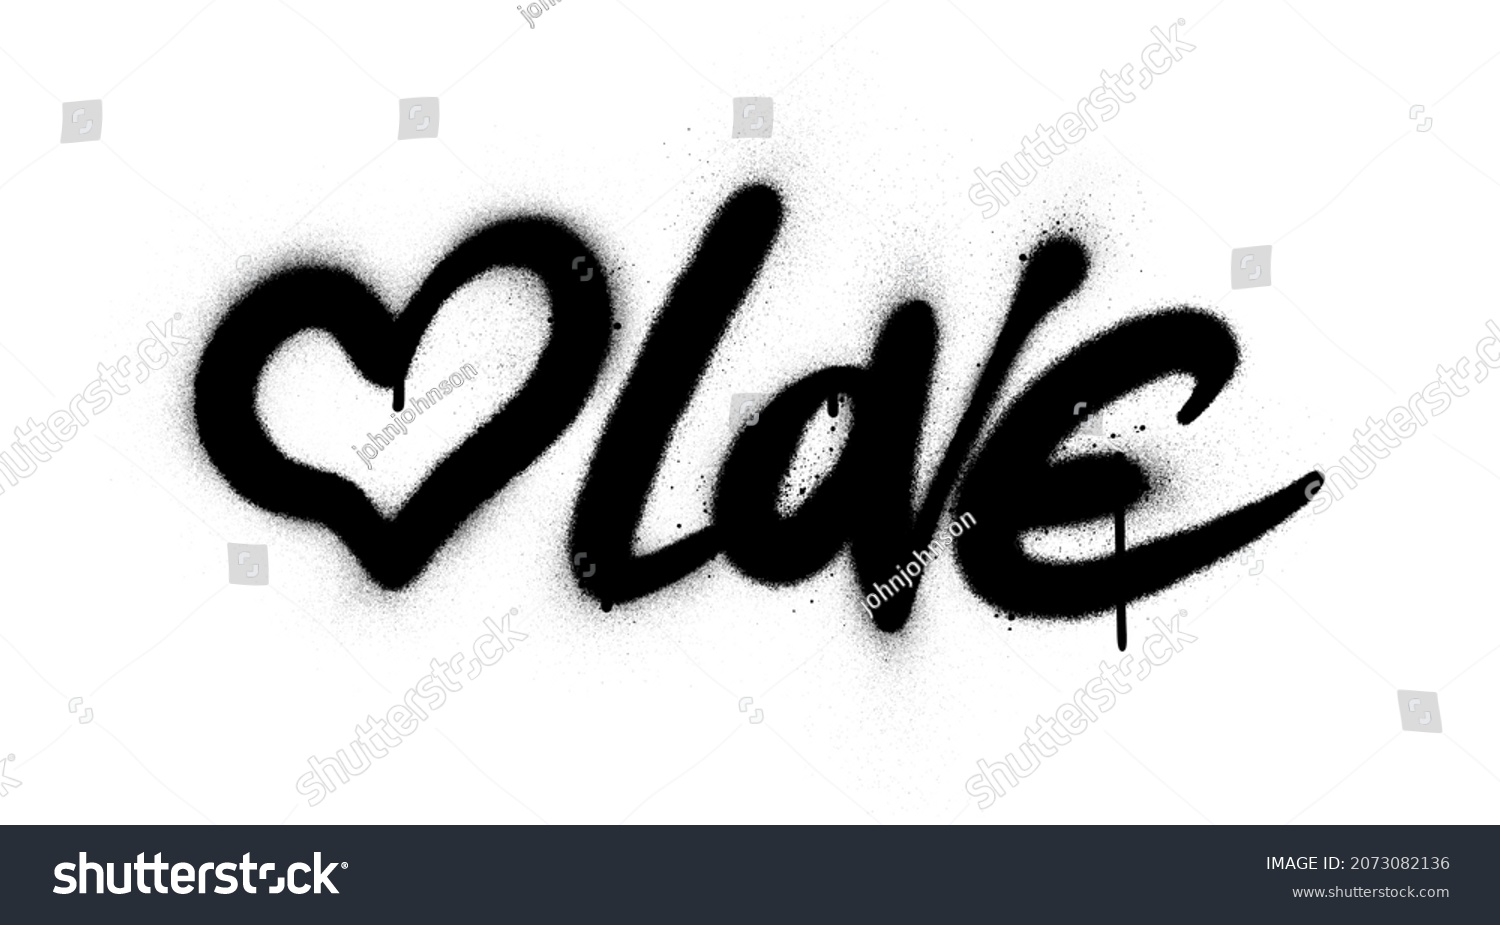 SVG of graffiti love word with heart sprayed in black on white svg